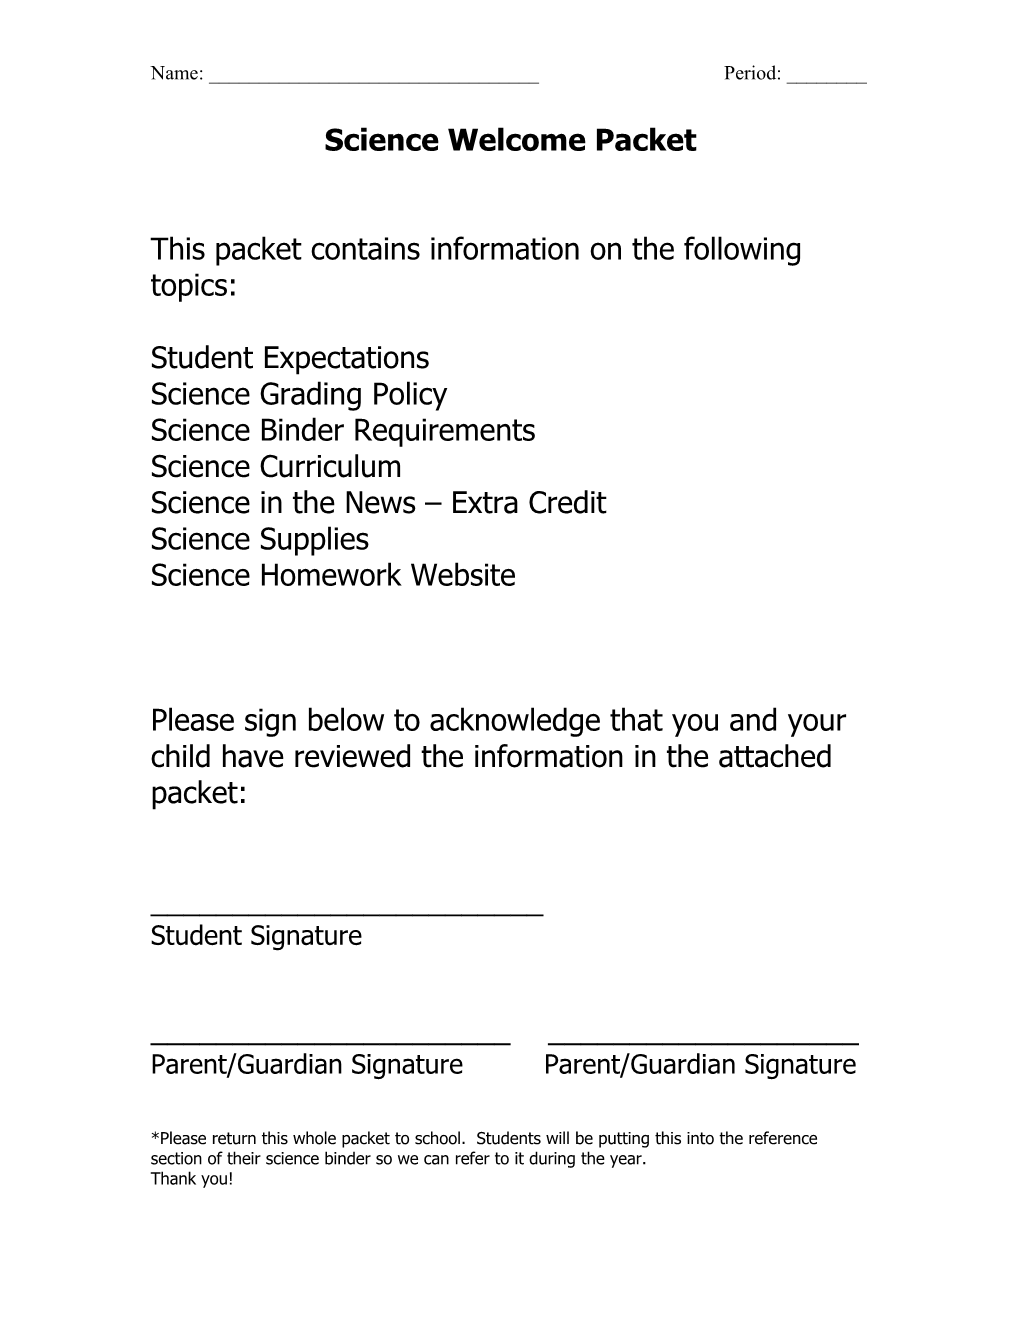 Science Welcome Packet